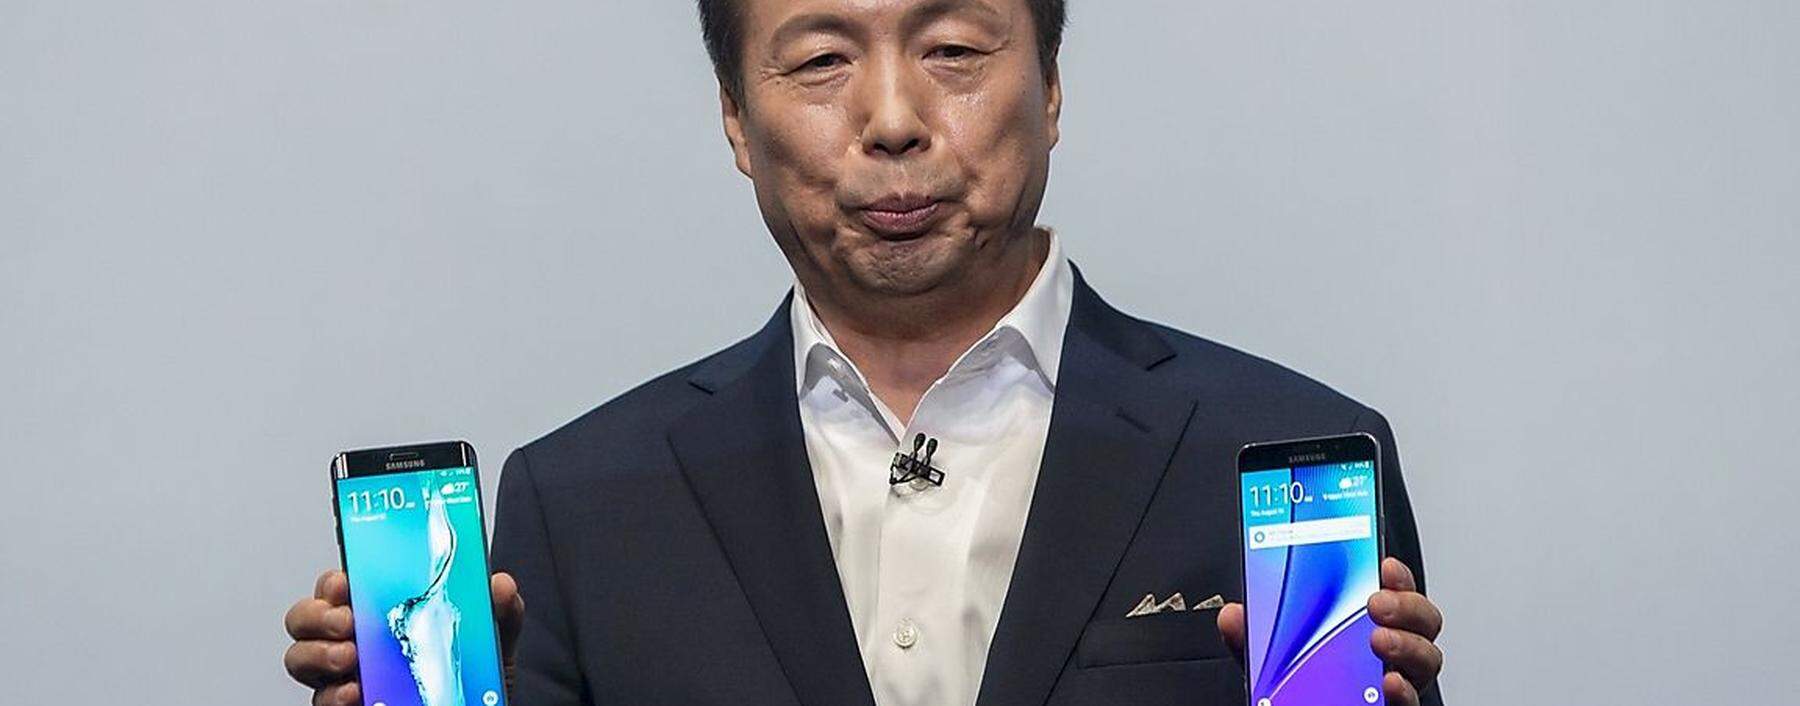 President and CEO of Samsung Electronics J.K. Shin holds a Samsung Galaxy S6 Edge+ and a Samsung Galaxy Note 5 at the products' launch event in New York